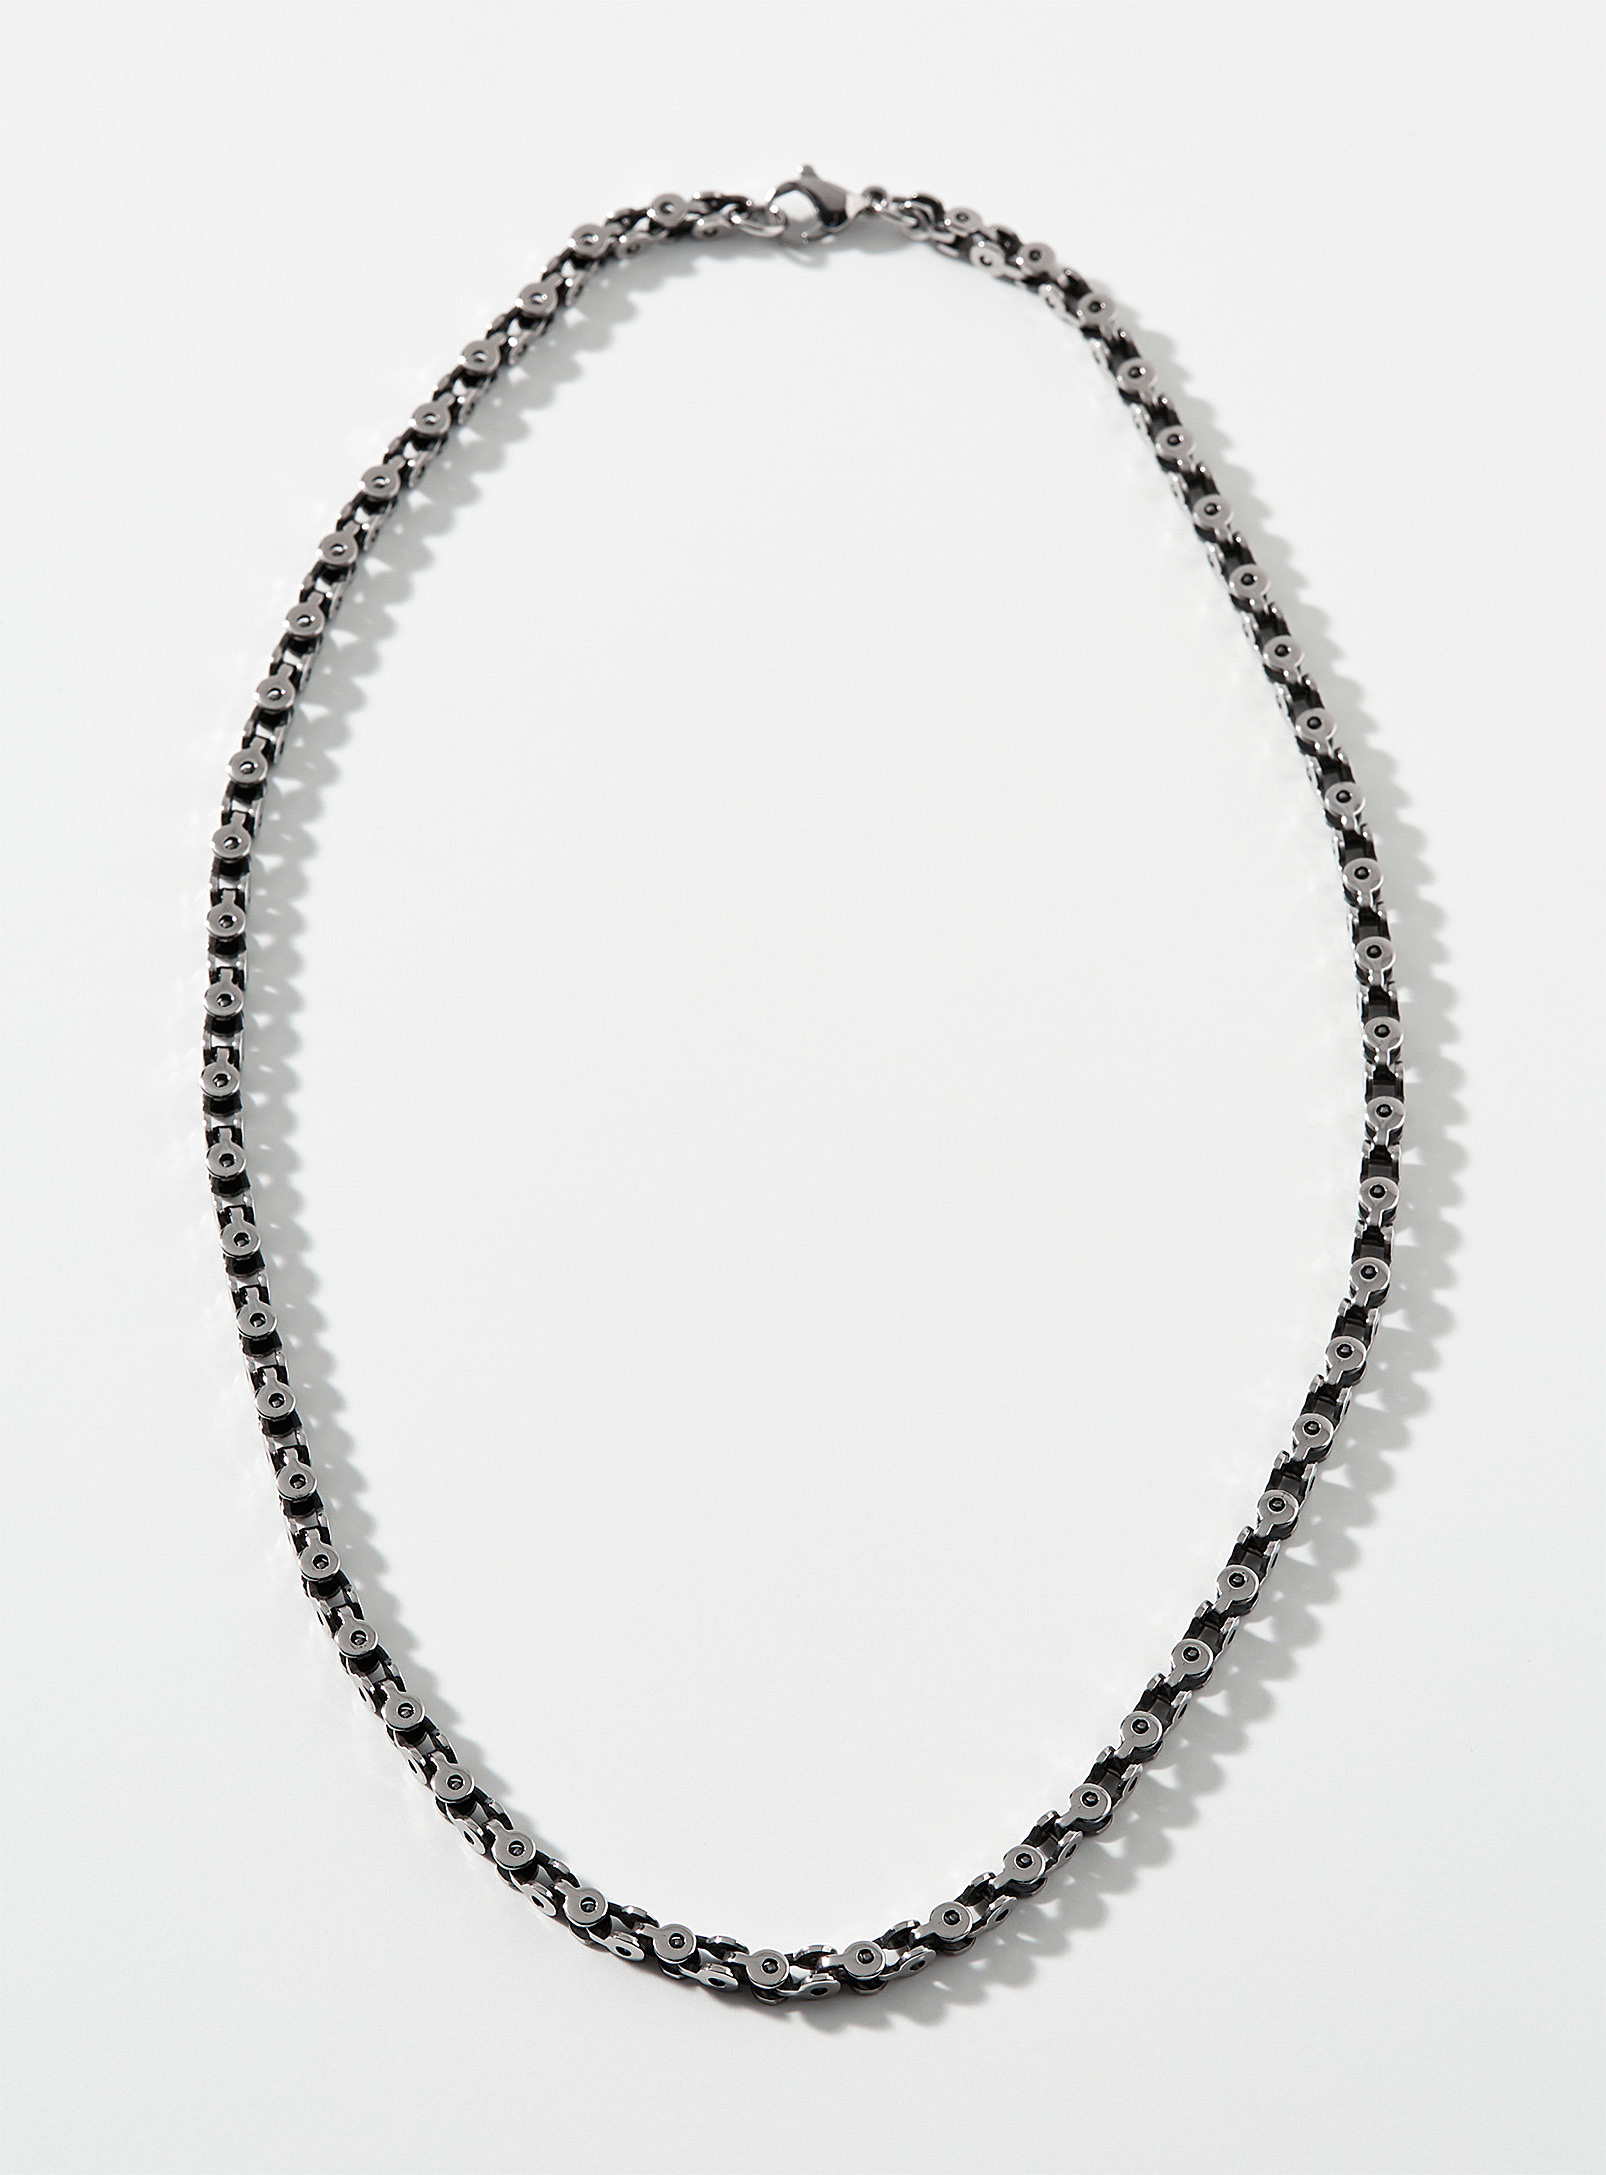 Le 31 - Men's Bike-chain-inspired necklace